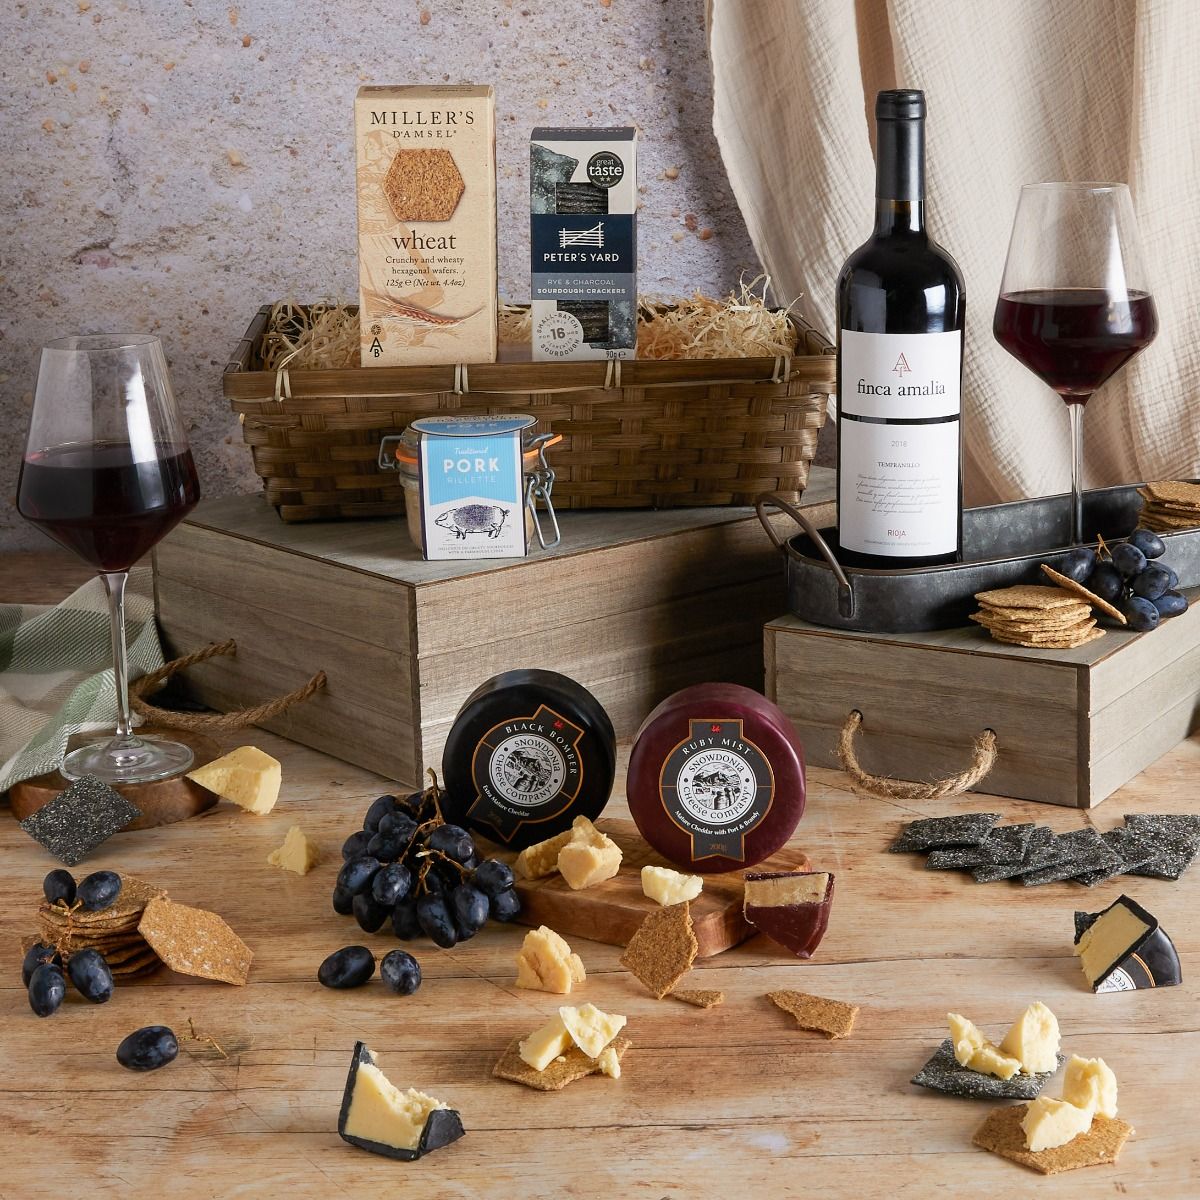 Father's Day Wine, Cheese and Rillette Hamper with contents on display